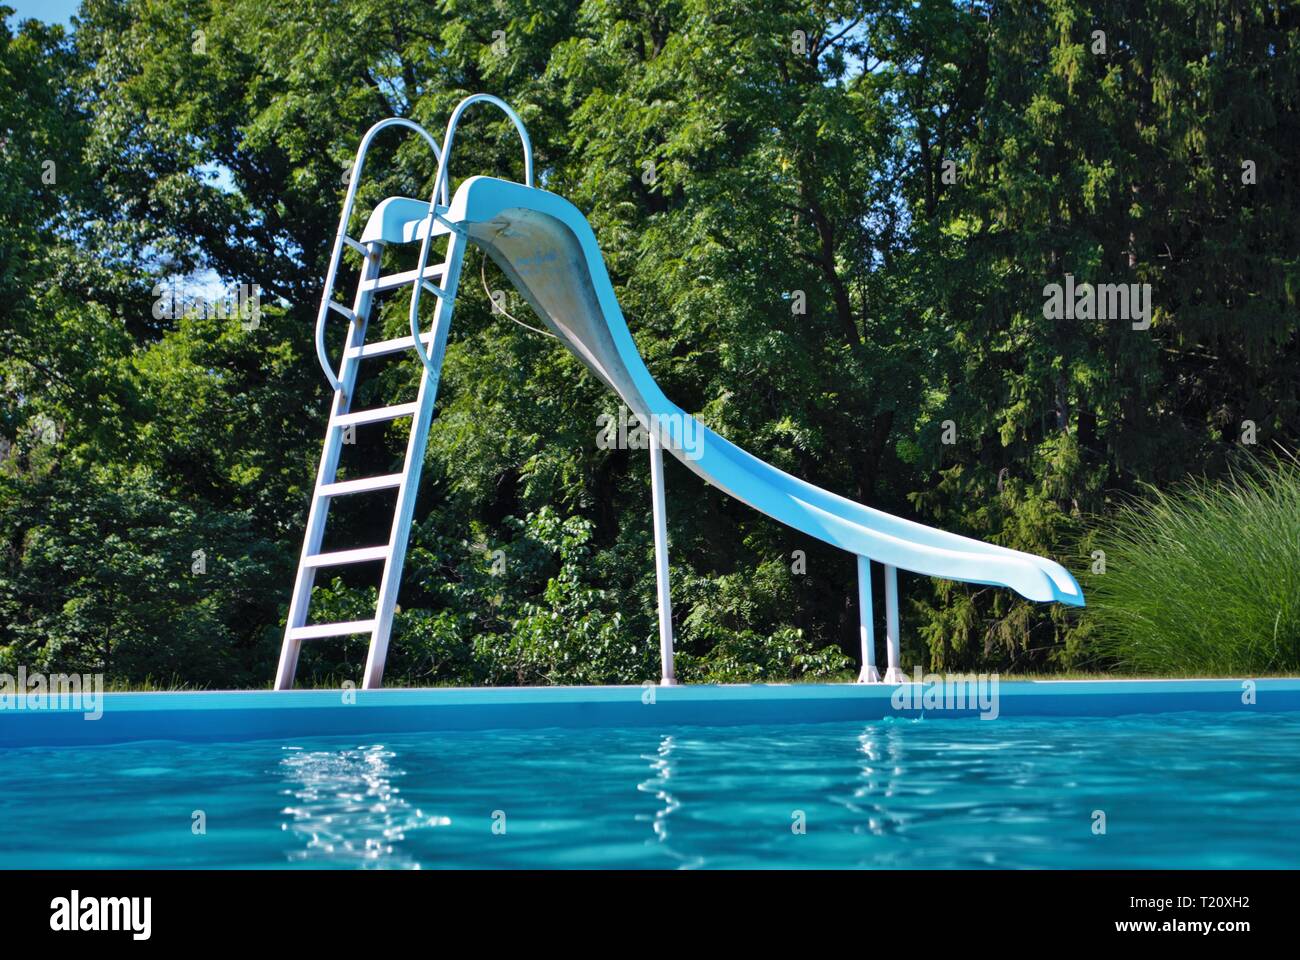 Water level view of a poolside on a bright and sunny day Stock Photo